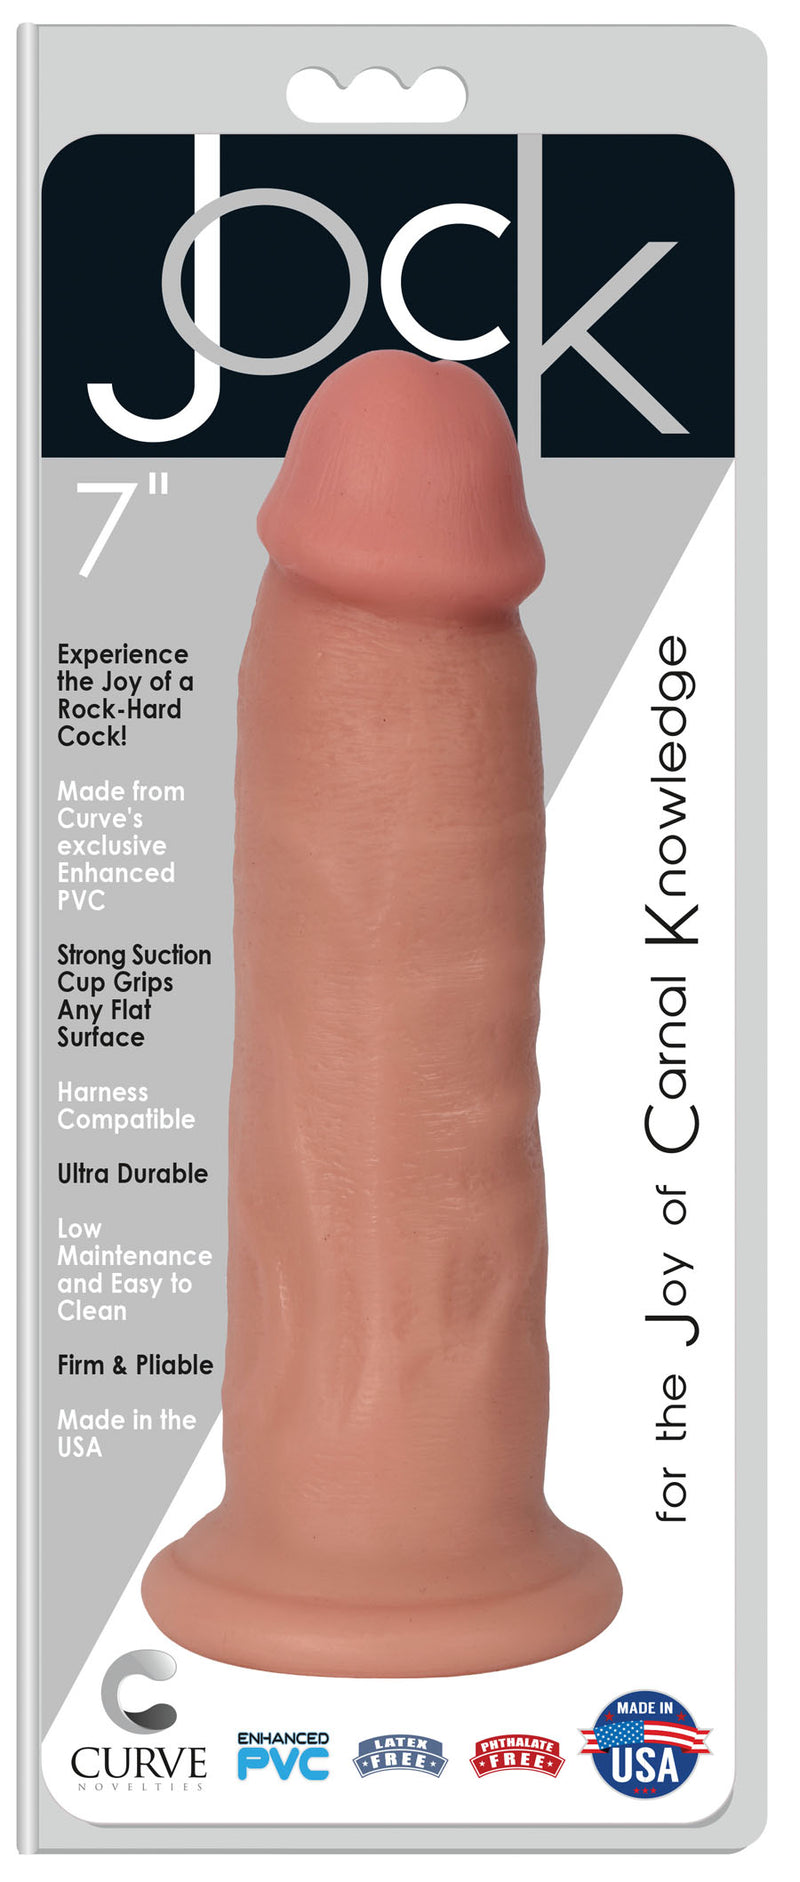 Experience Ultimate Pleasure with Our Suction Cup Dildos - Harness Compatible and Phthalate Free!